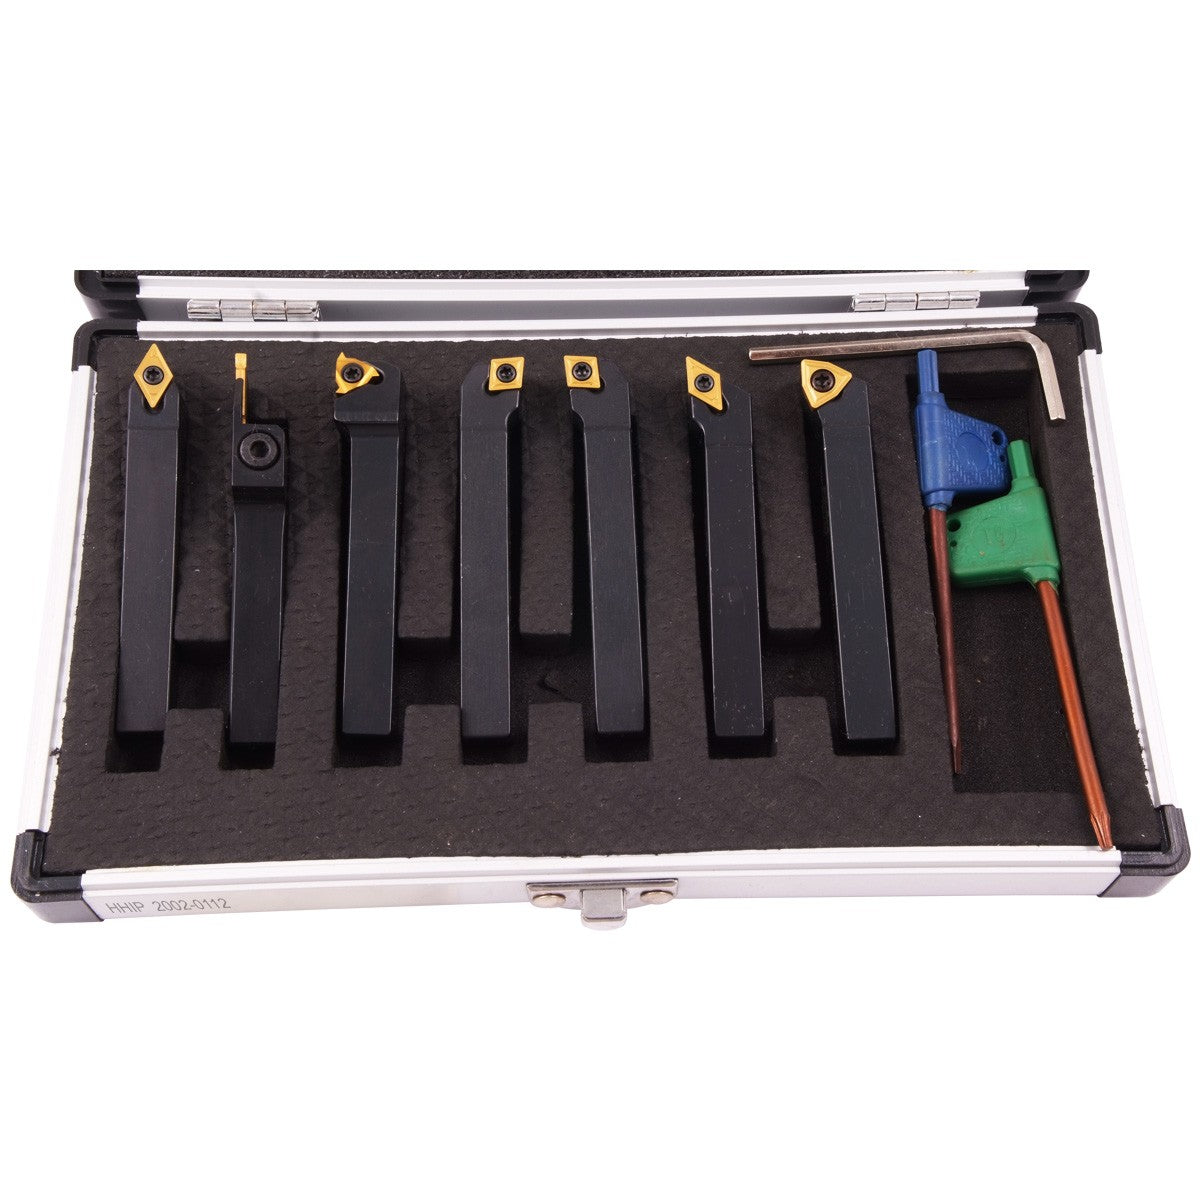 PRO-SERIES 7 PIECE 3/8 INDEXABLE CUT OFF & TURNING TOOL SET